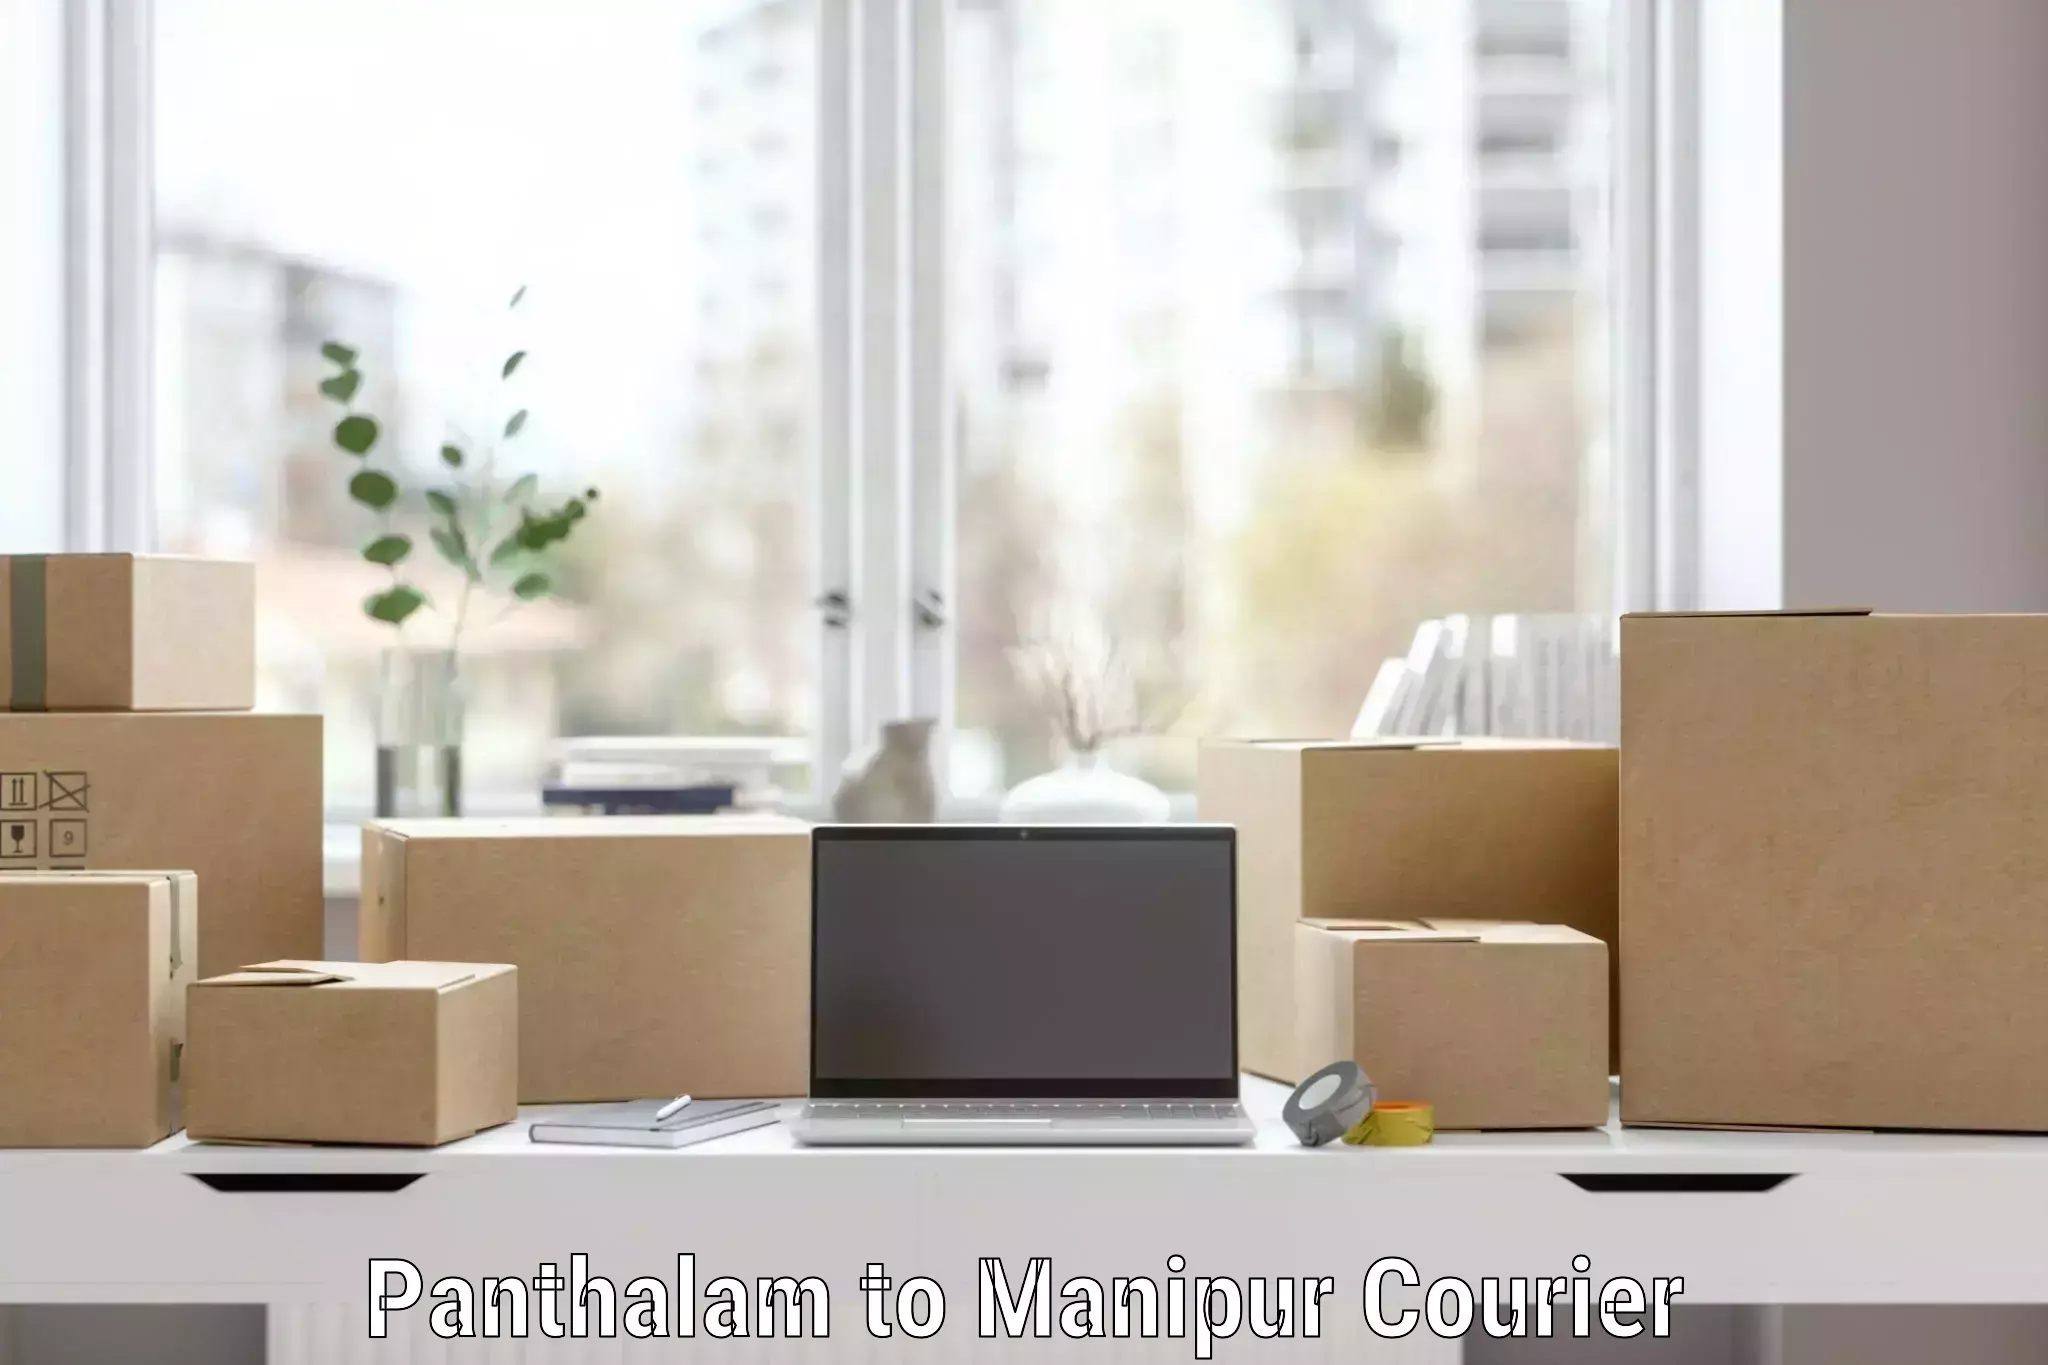 Nationwide moving services Panthalam to Manipur